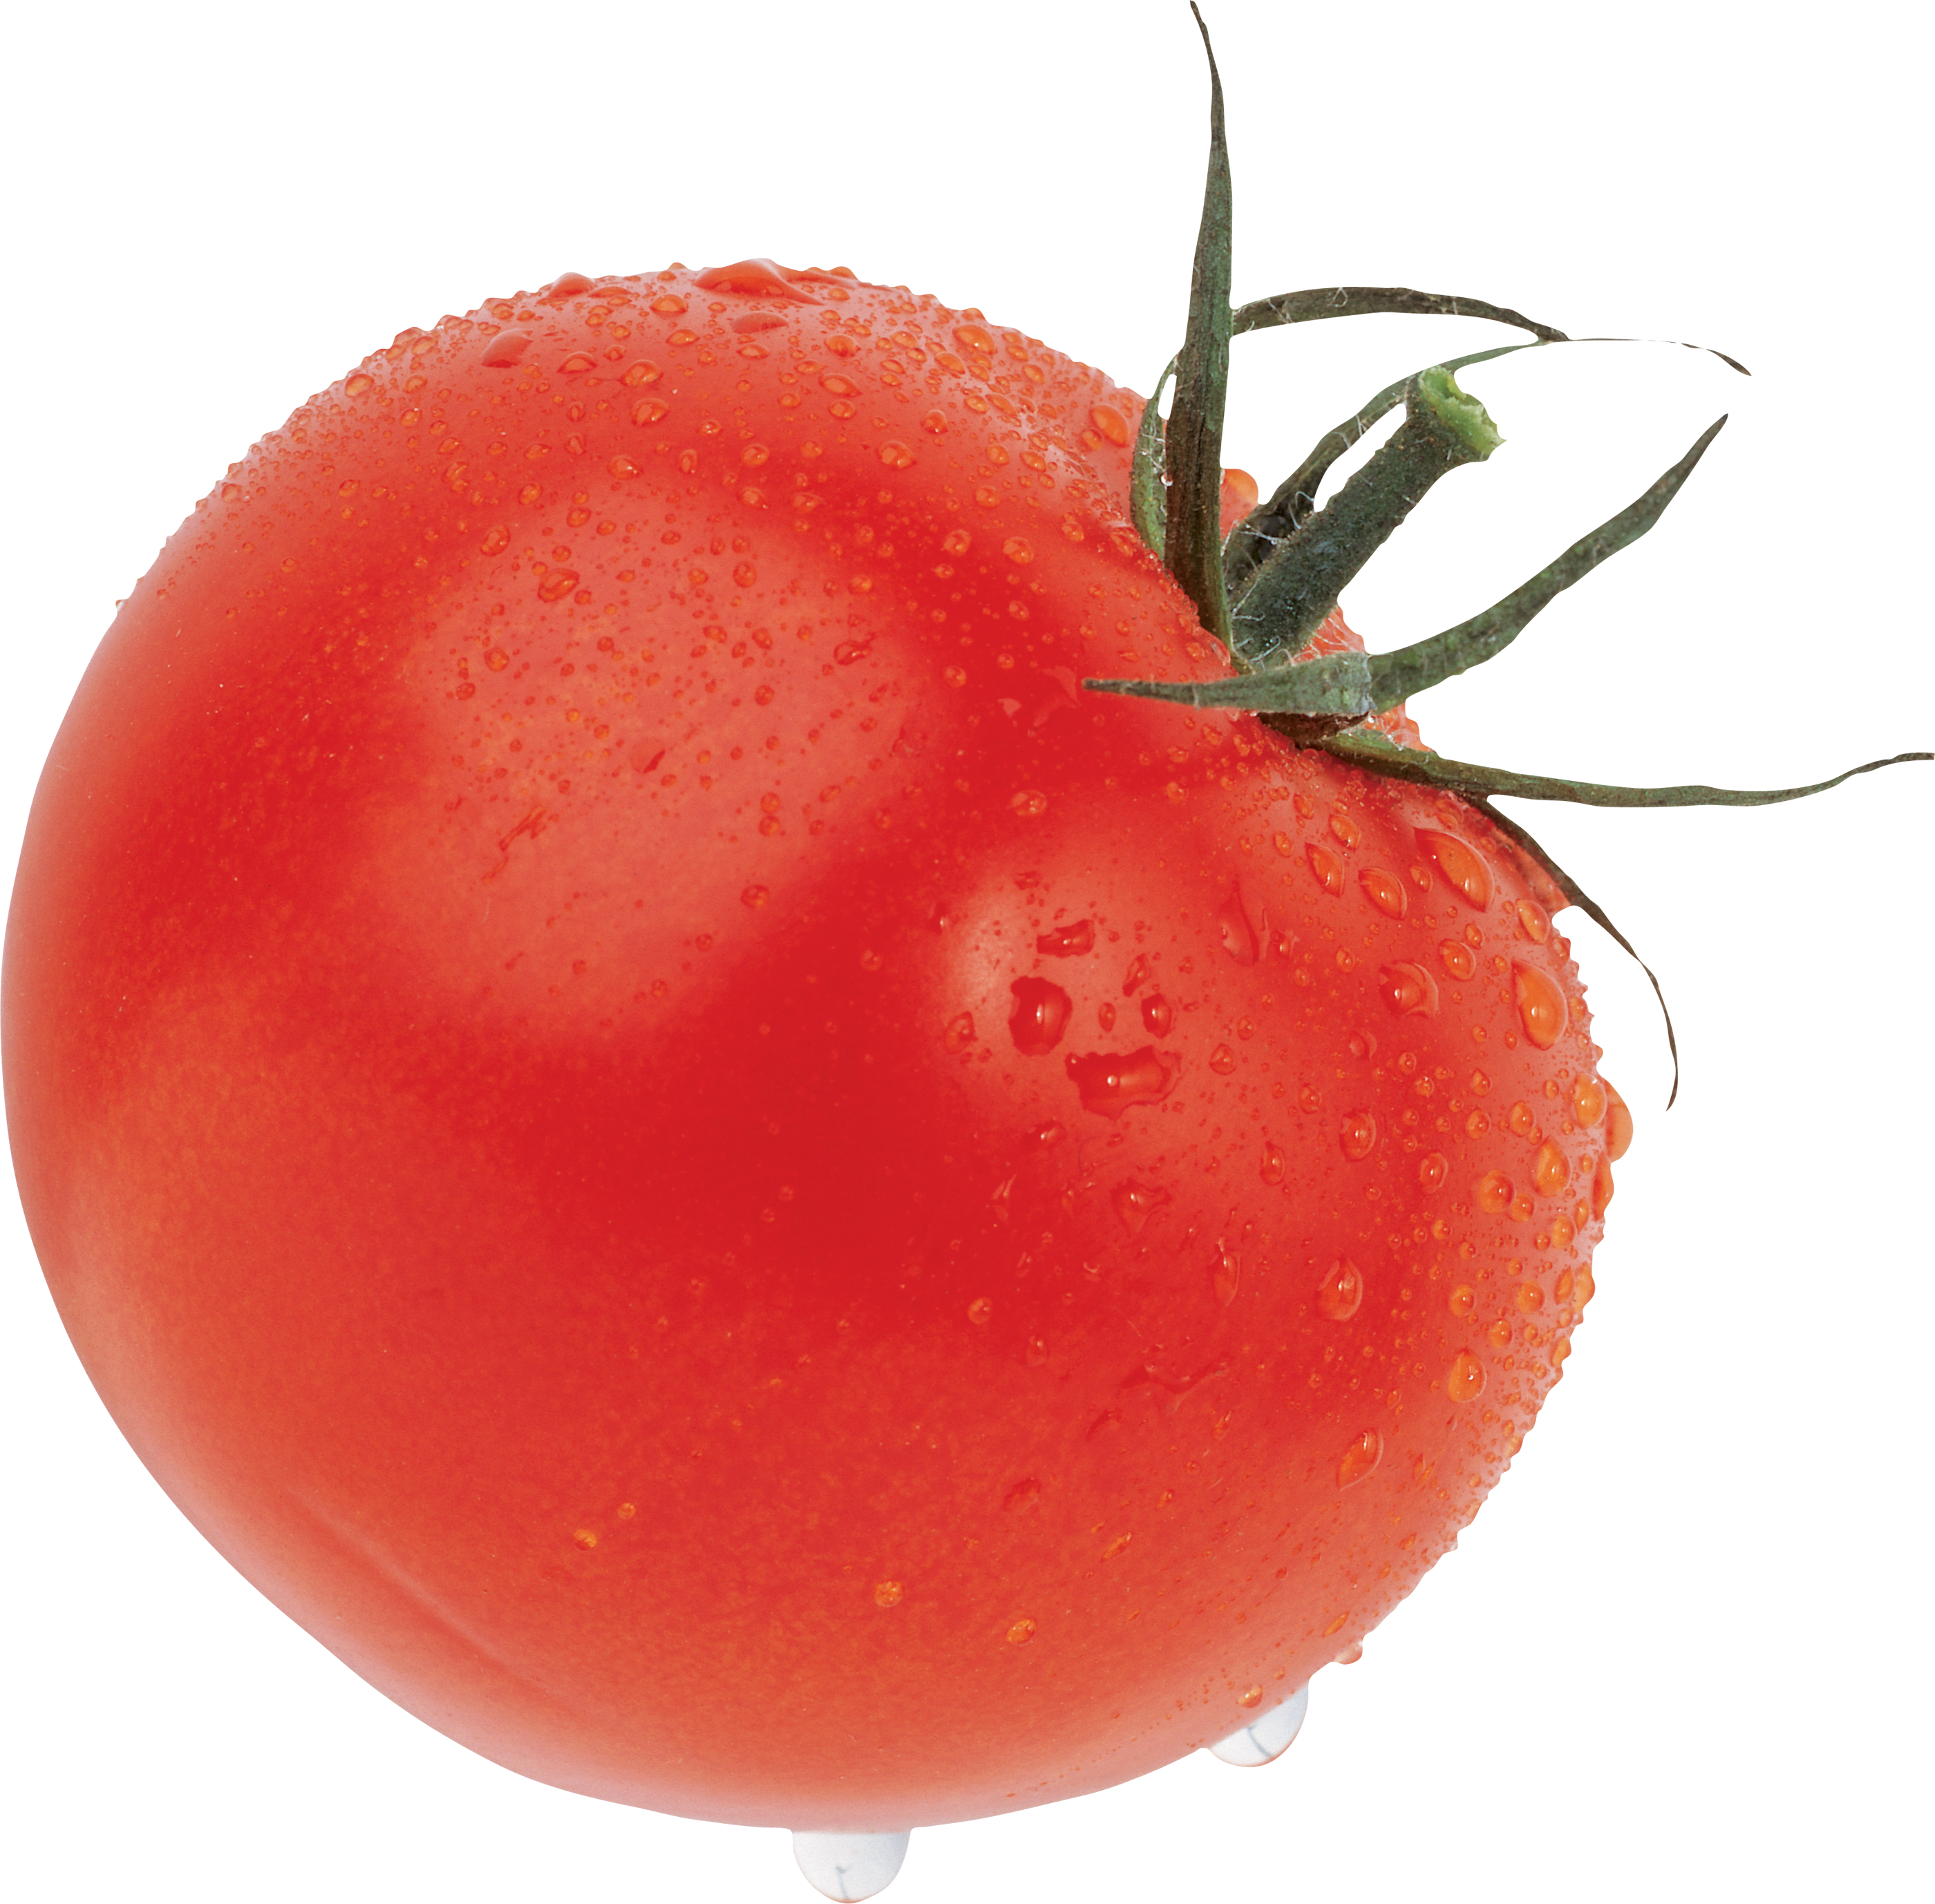 Tomato large red PNG image